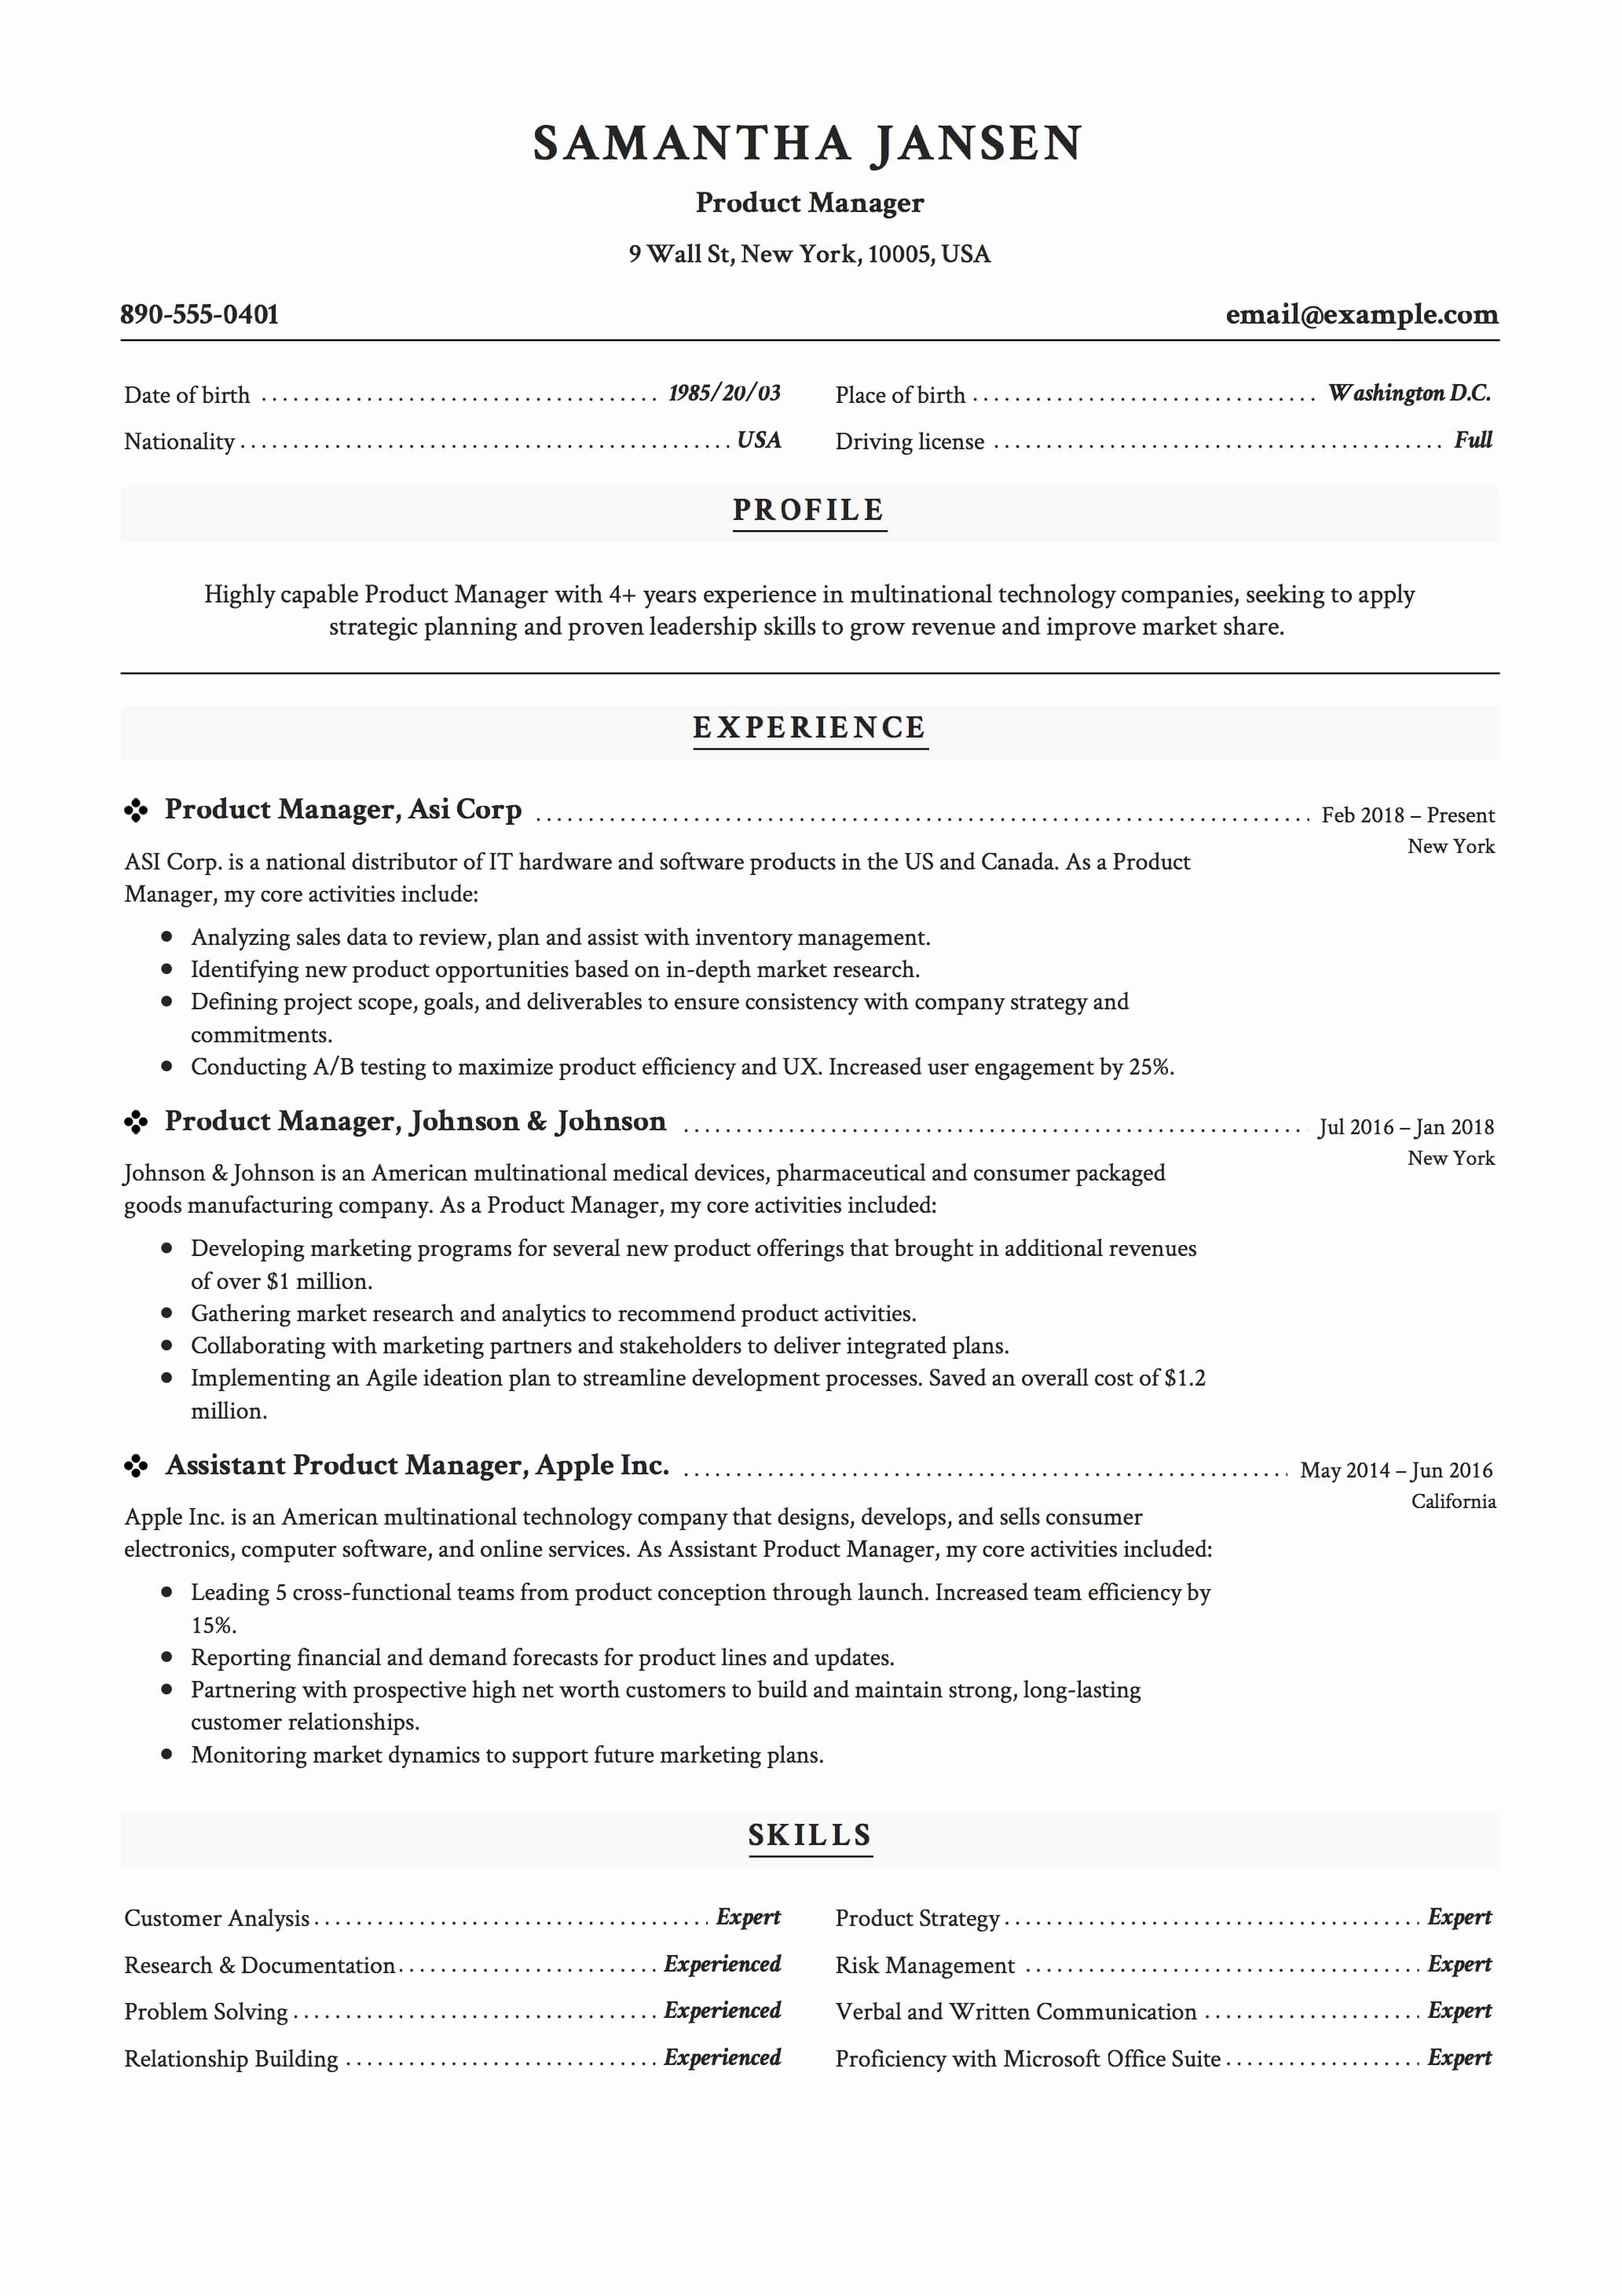 Product Manager Resume Template Unique Product Manager Resume Resume [ 12 Samples ] Pdf